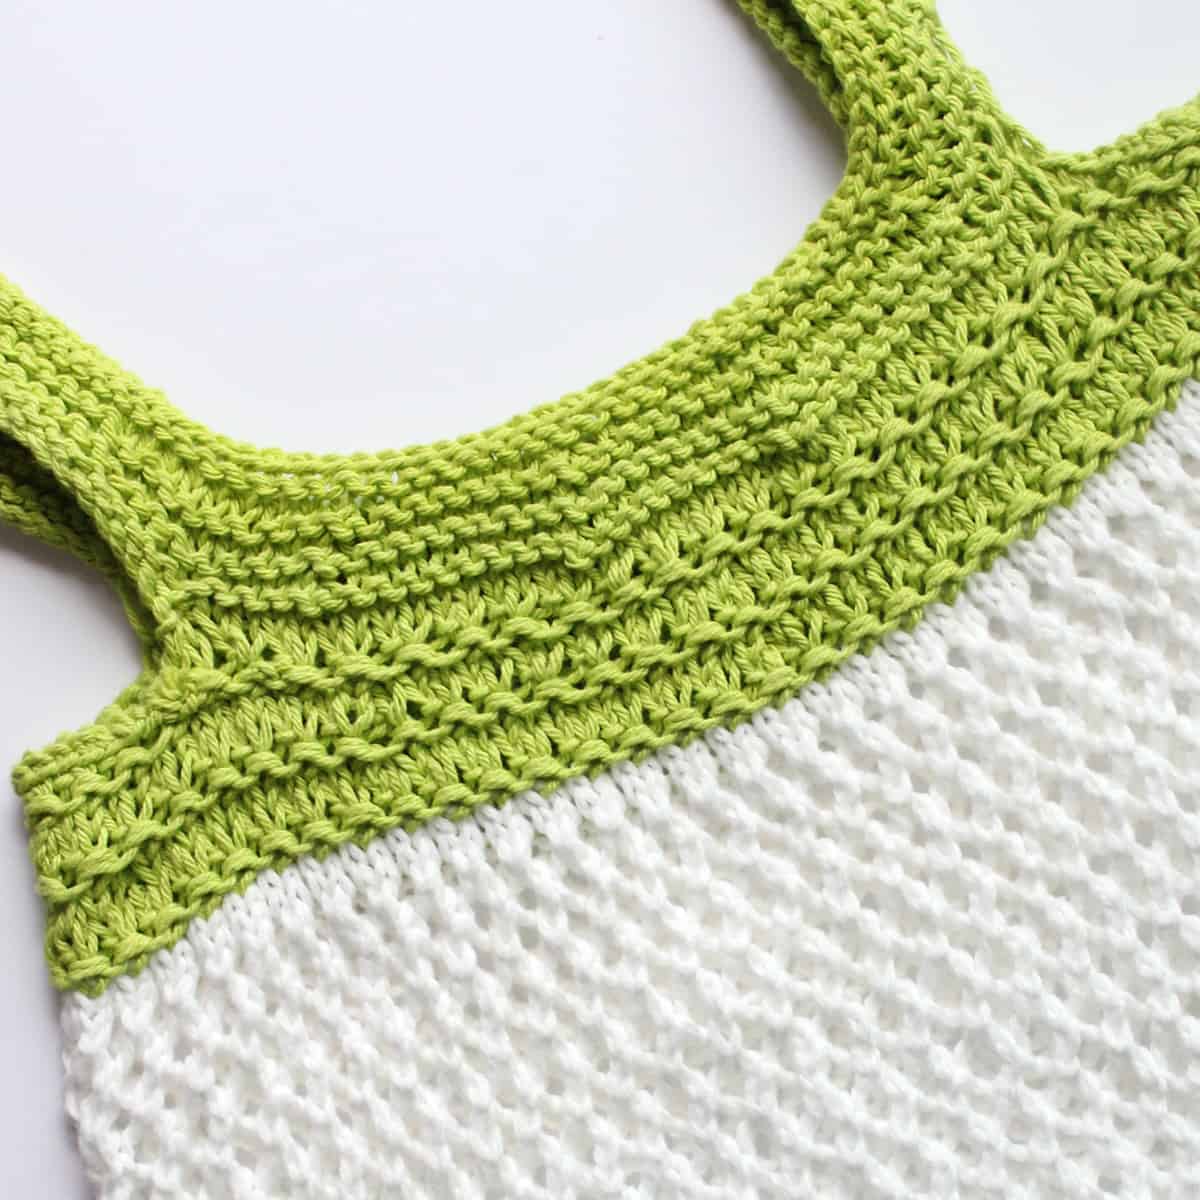 Top of mesh market bag knitted in green and white yarn colors.